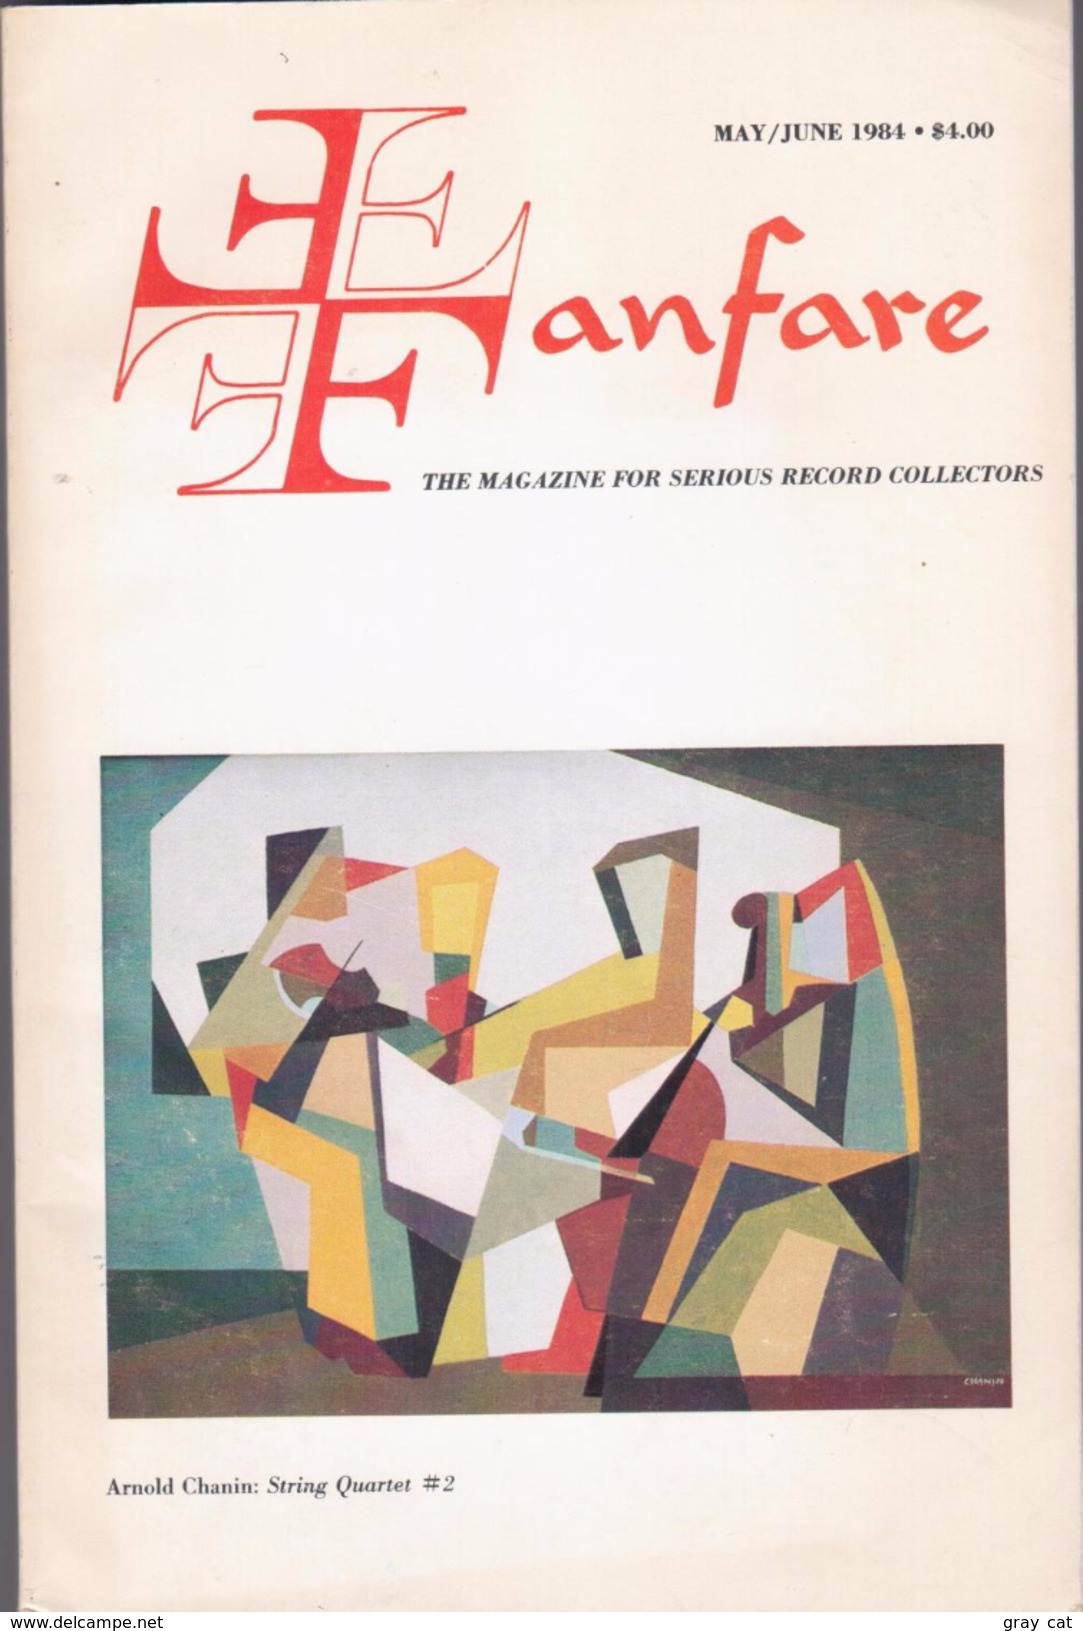 Fanfare, The Magazine For Serious Record Collectors, Vol. 7, No. 5, May/June 1984 - Divertimento